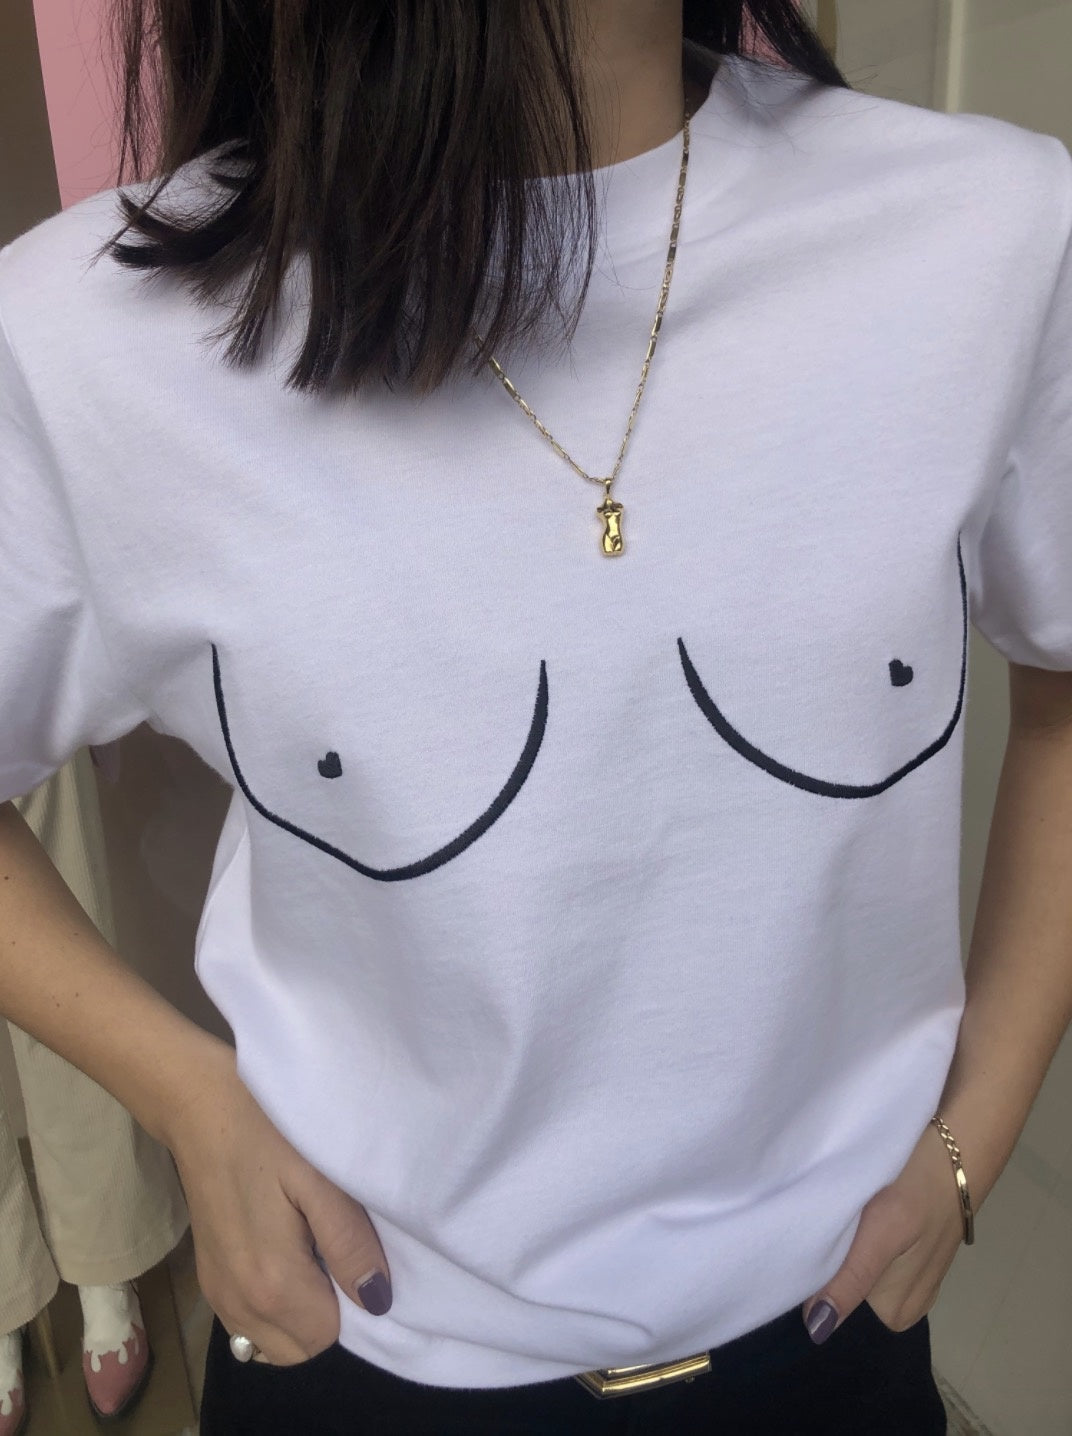 Tits Shirt in White/Black by T.I.T.S.